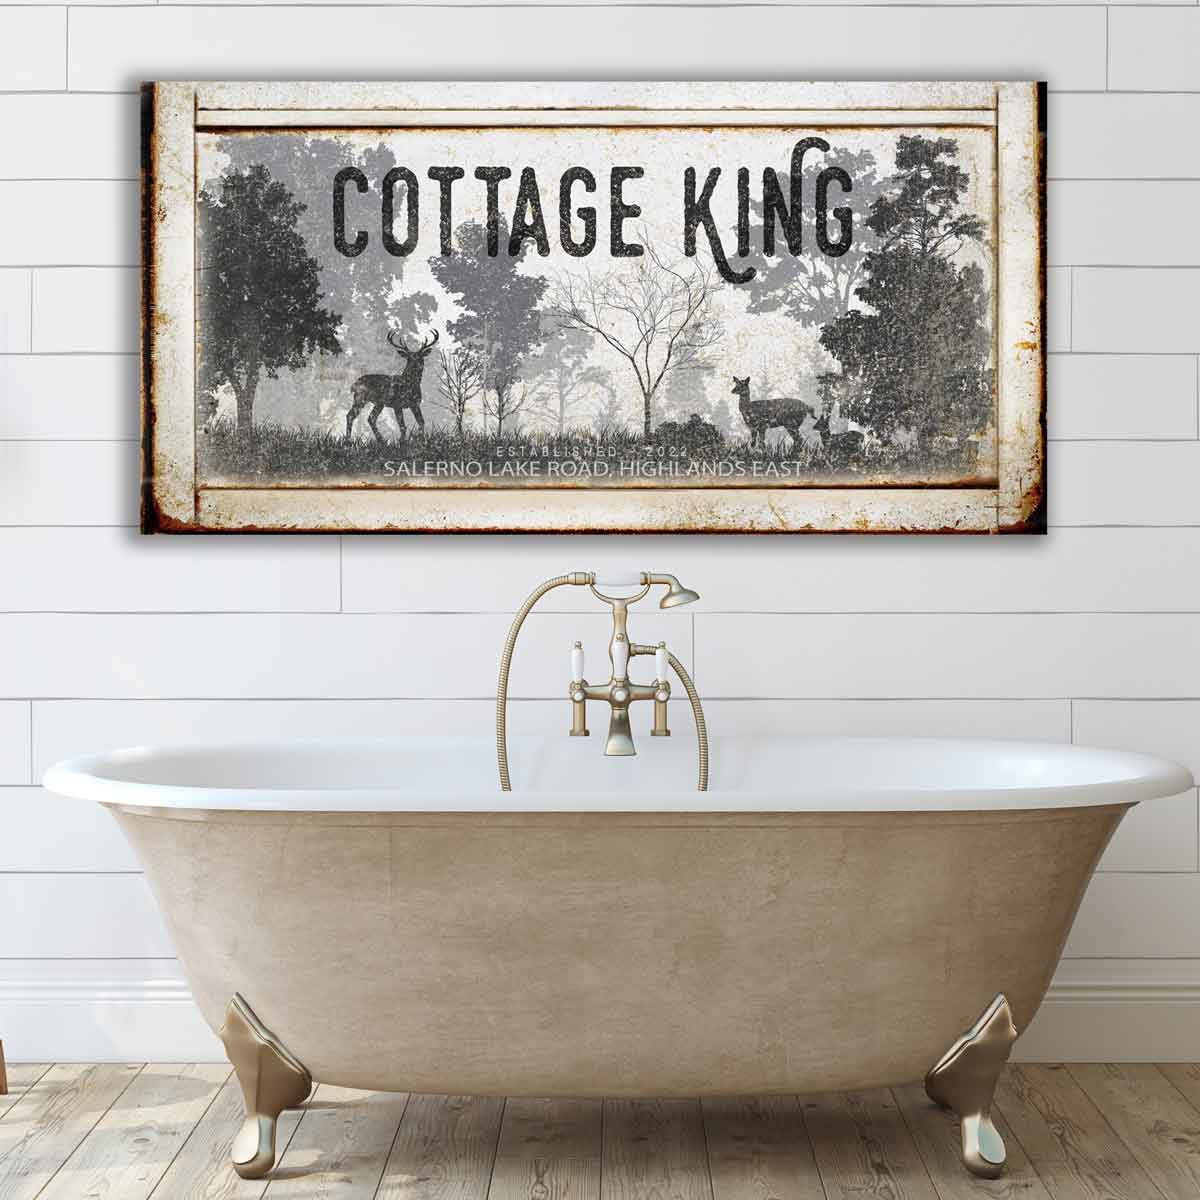 Cabin decor that reads [Cottage King] with a woodsy picture with deer on metal or canvas